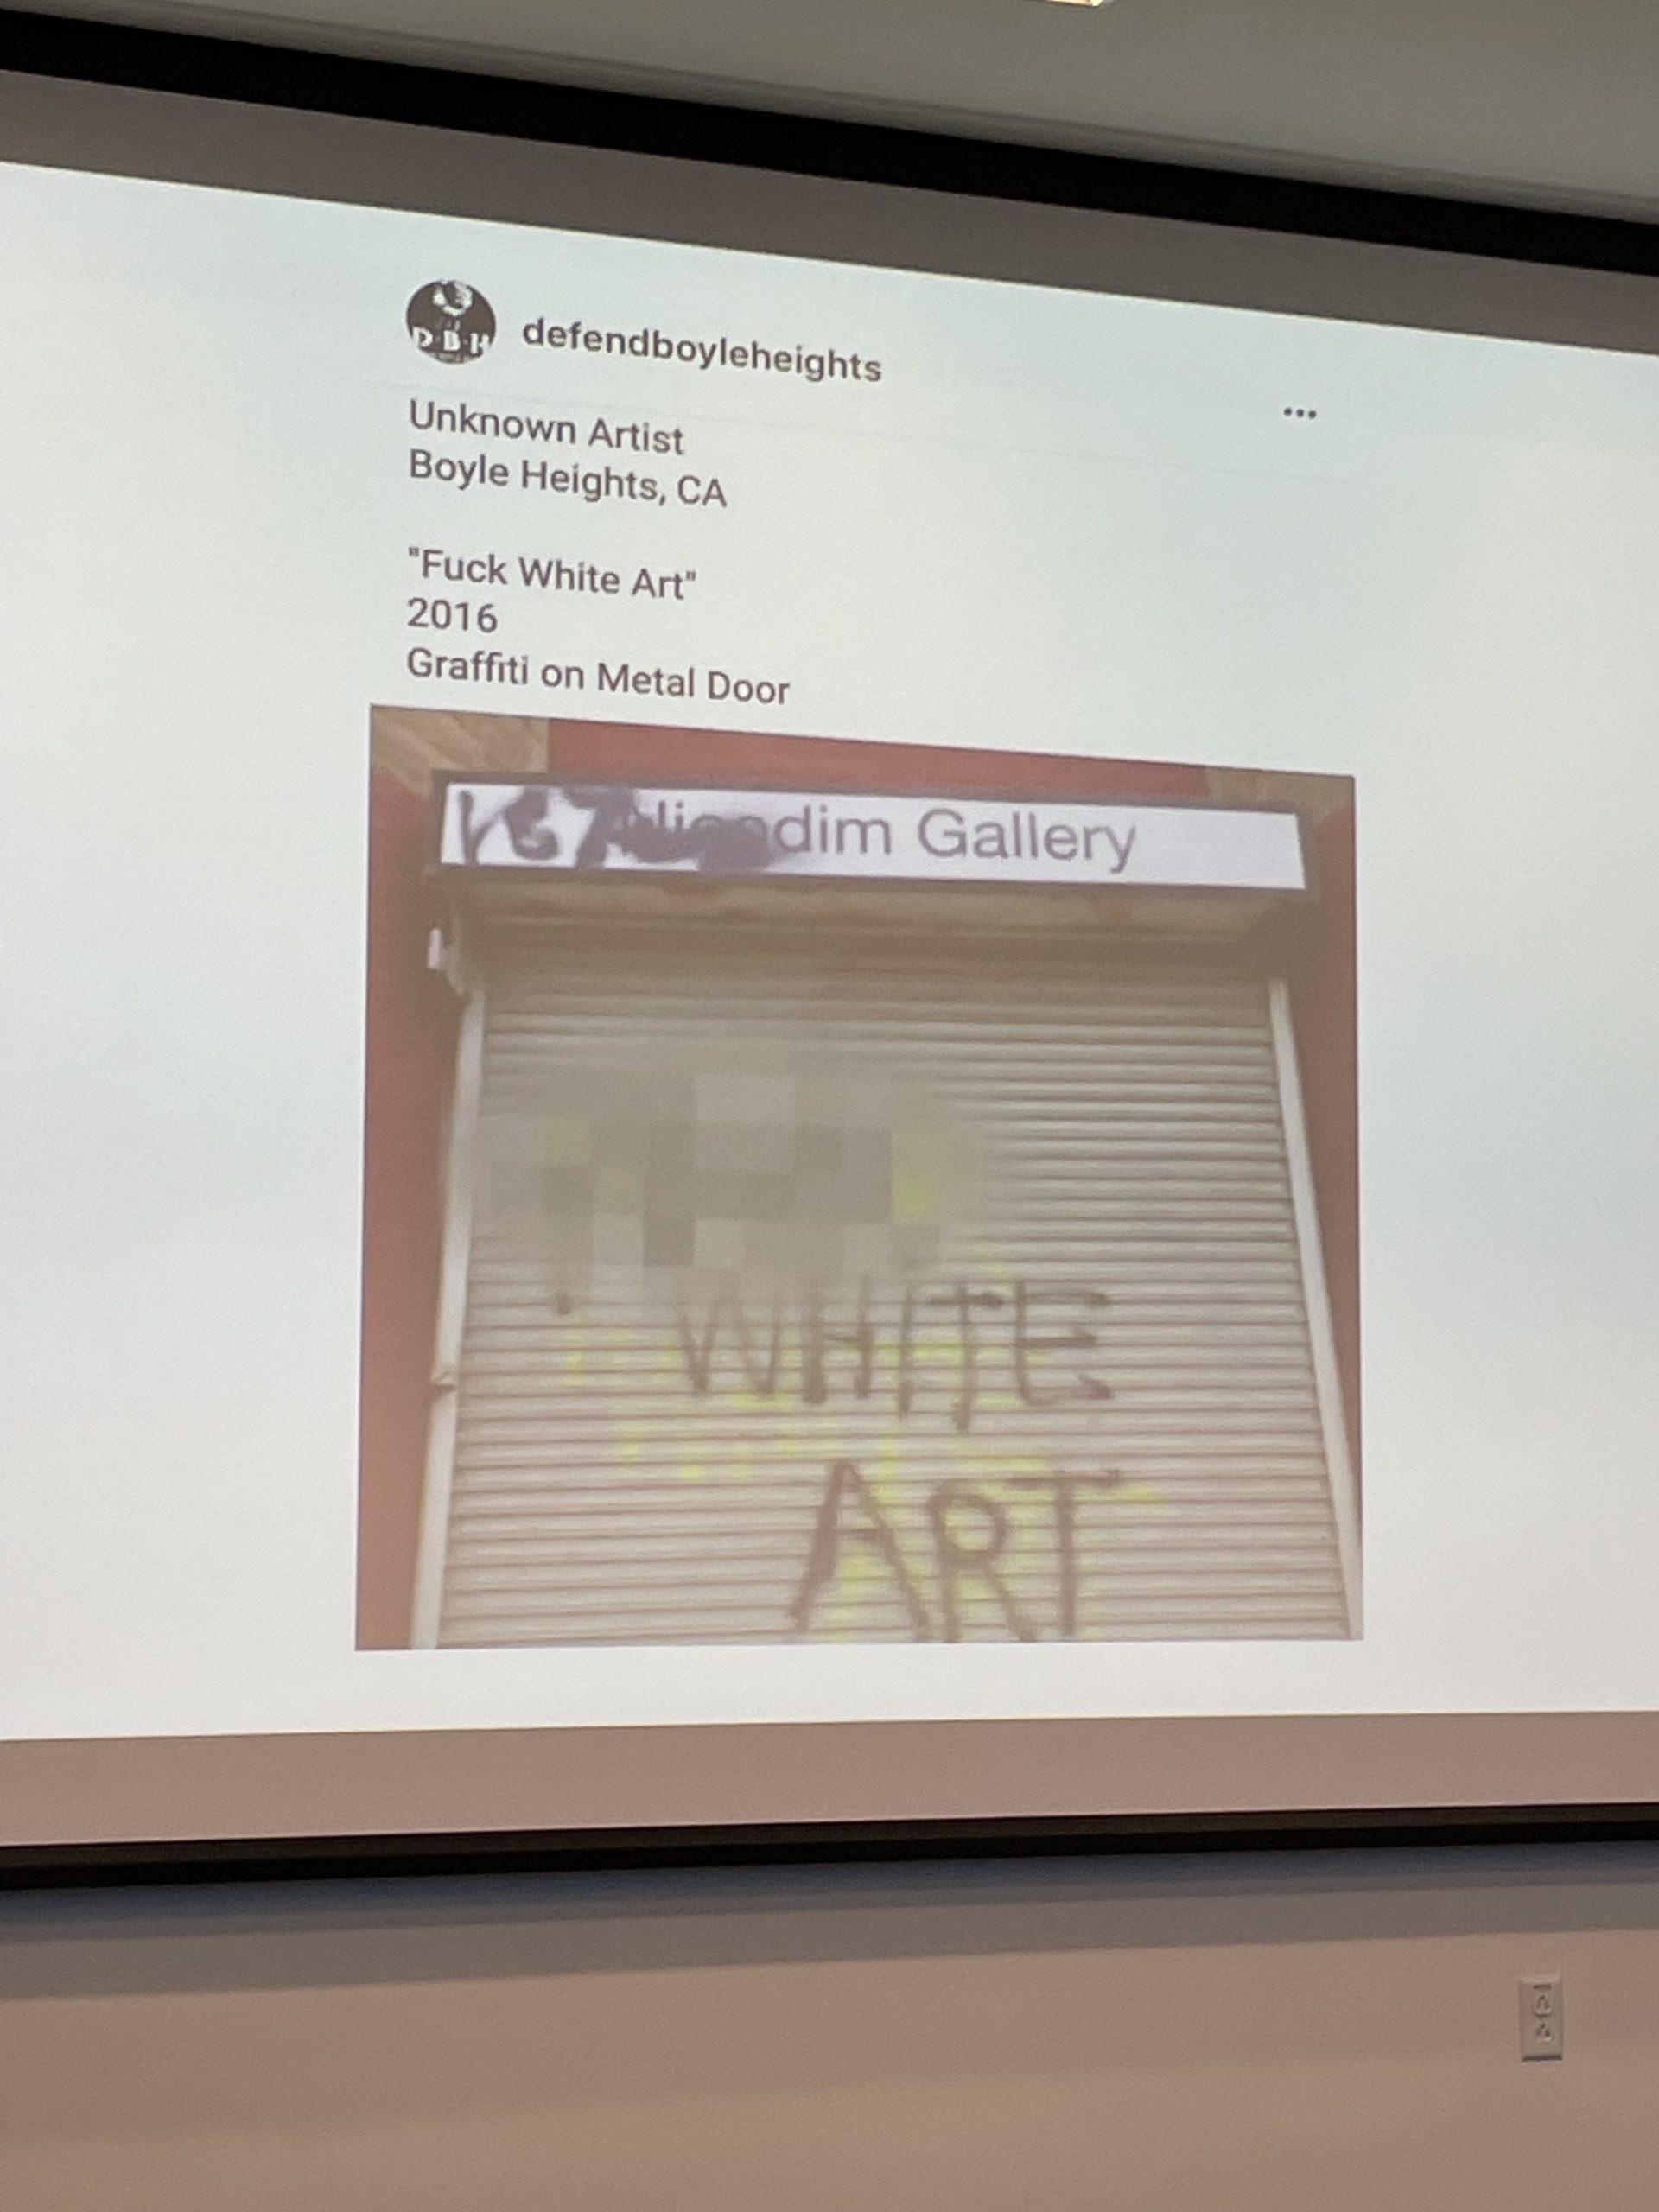 Dighton’s slide shows a tweet whose author subverts the genre of exhibition to resist gentrification. The author uses wall text, “Unknown Artist, Boyle Heights, CA, “Fuck White Art,” 2016, Graffi on Metal Door” to assign meaning to the image.